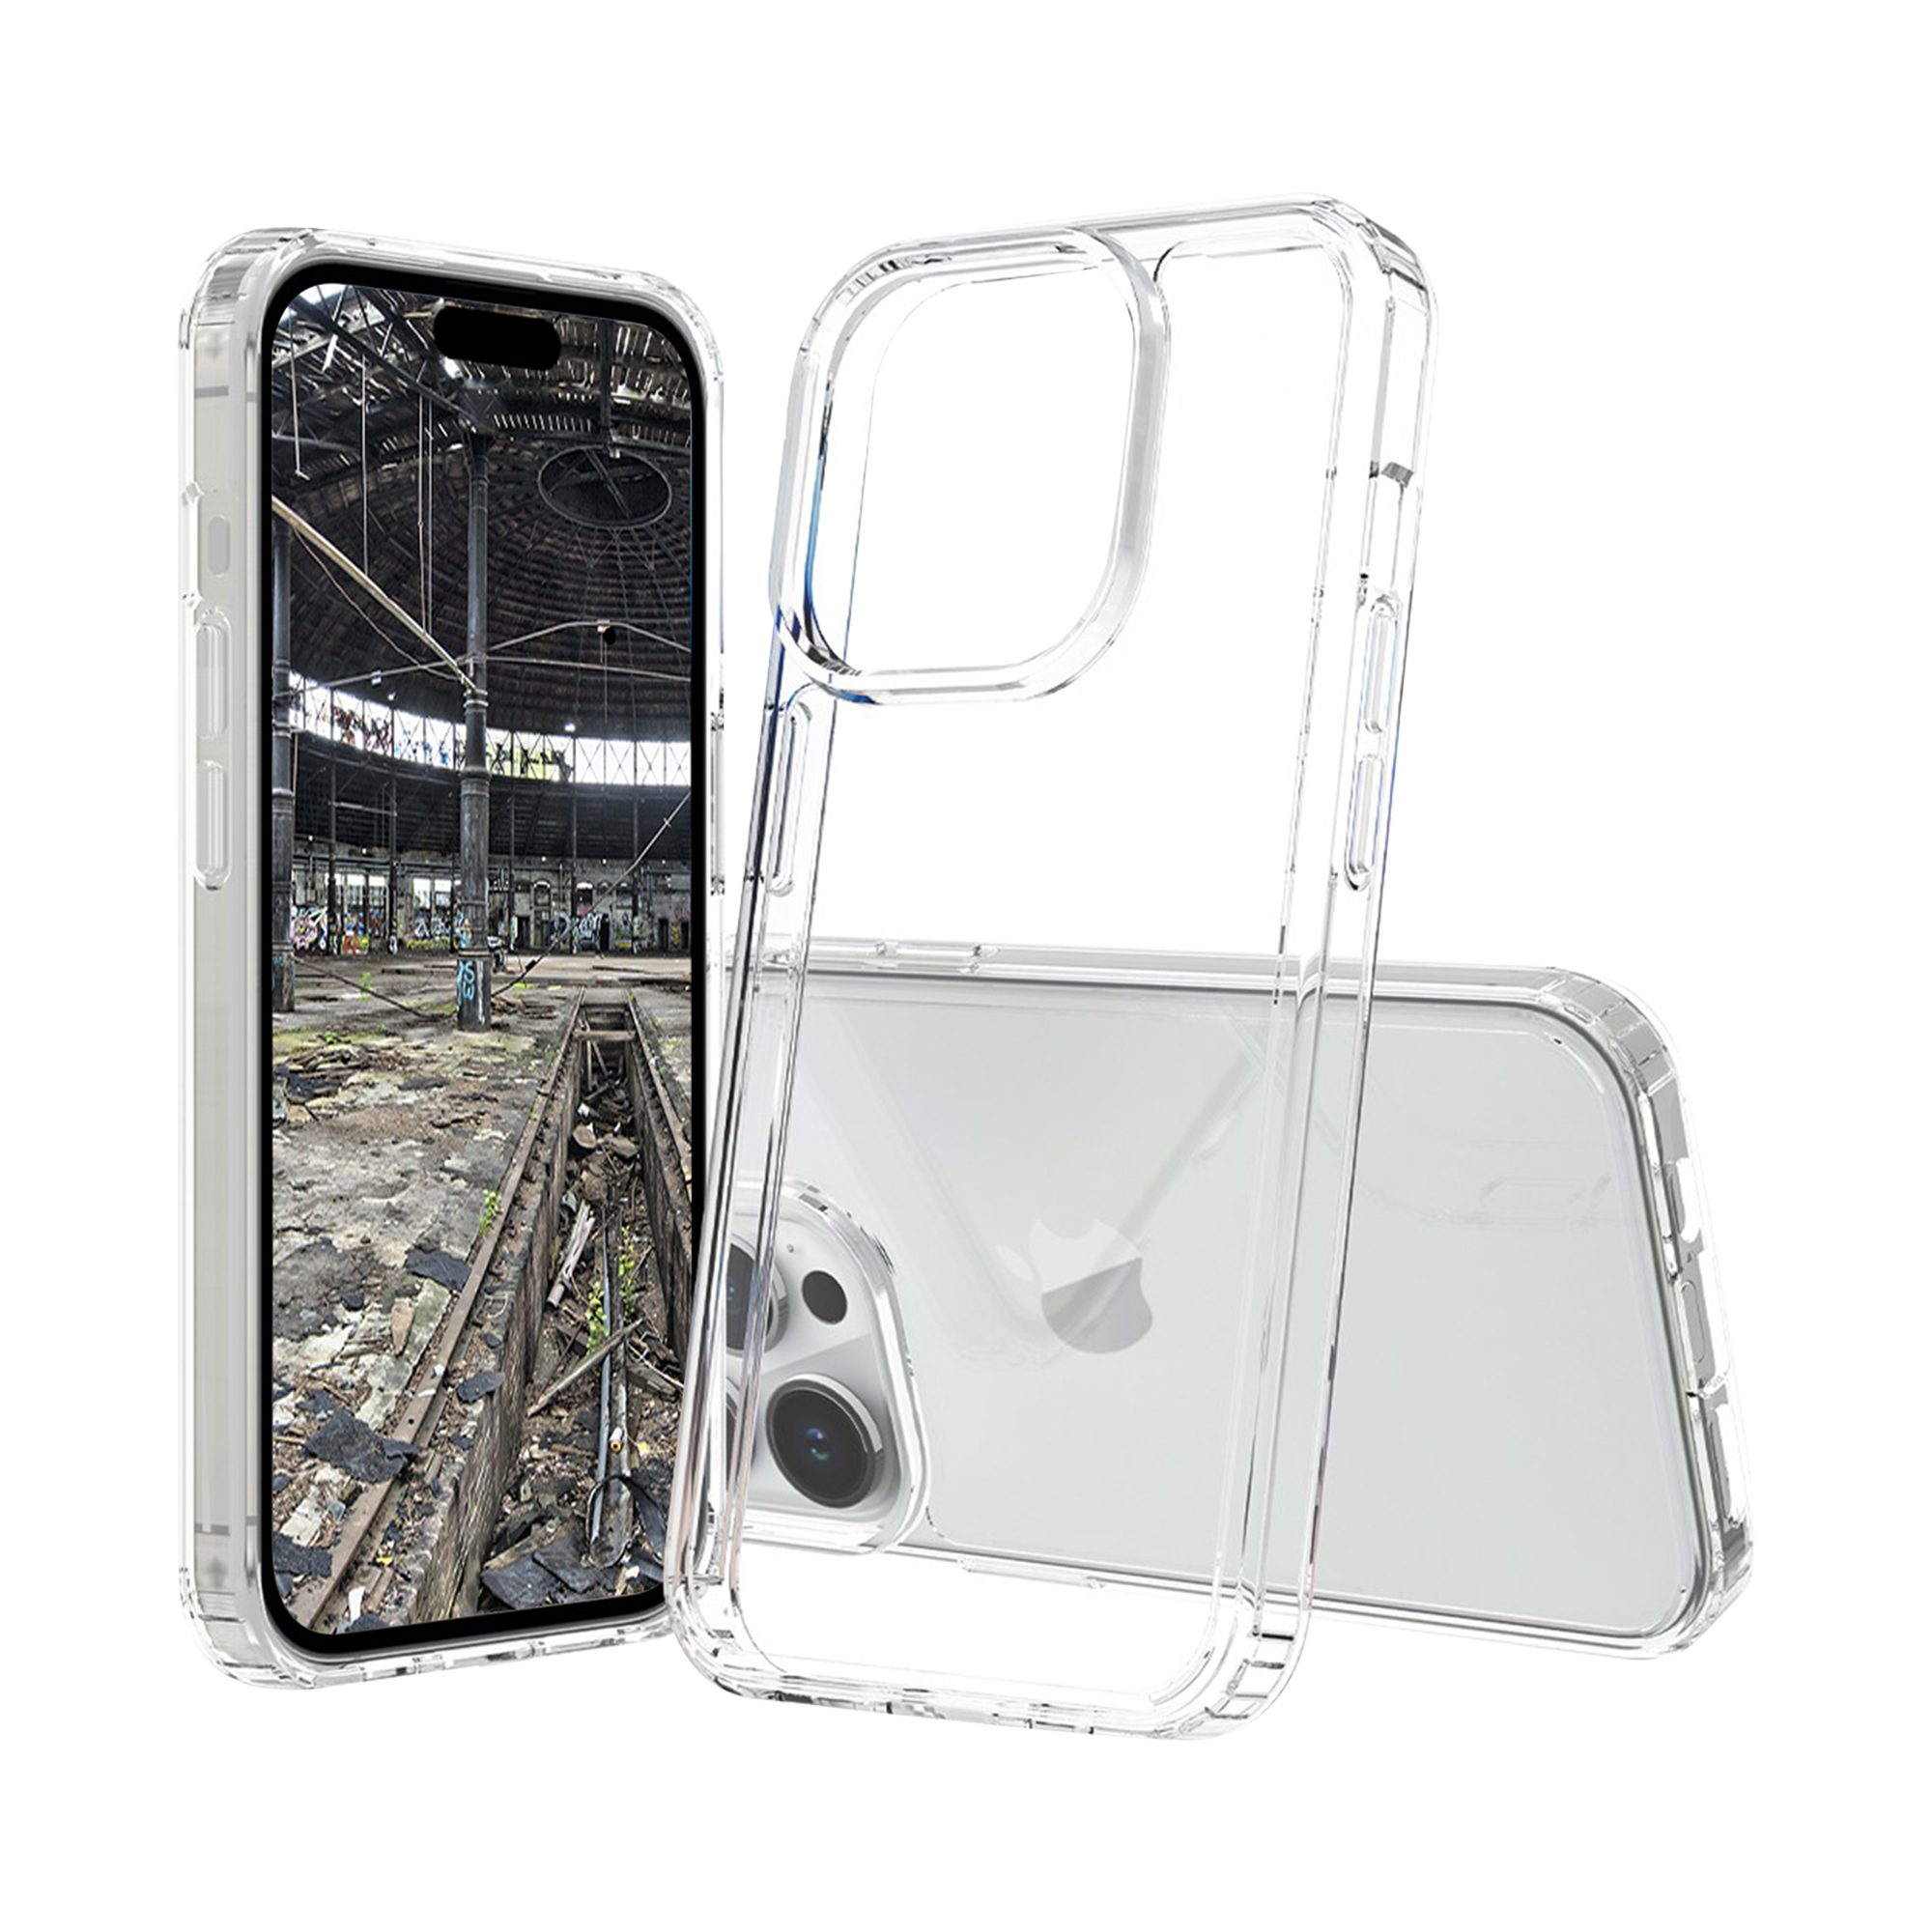 Backcover, JT Pro BERLIN Pankow 15 Max, iPhone Apple, Clear, transparent